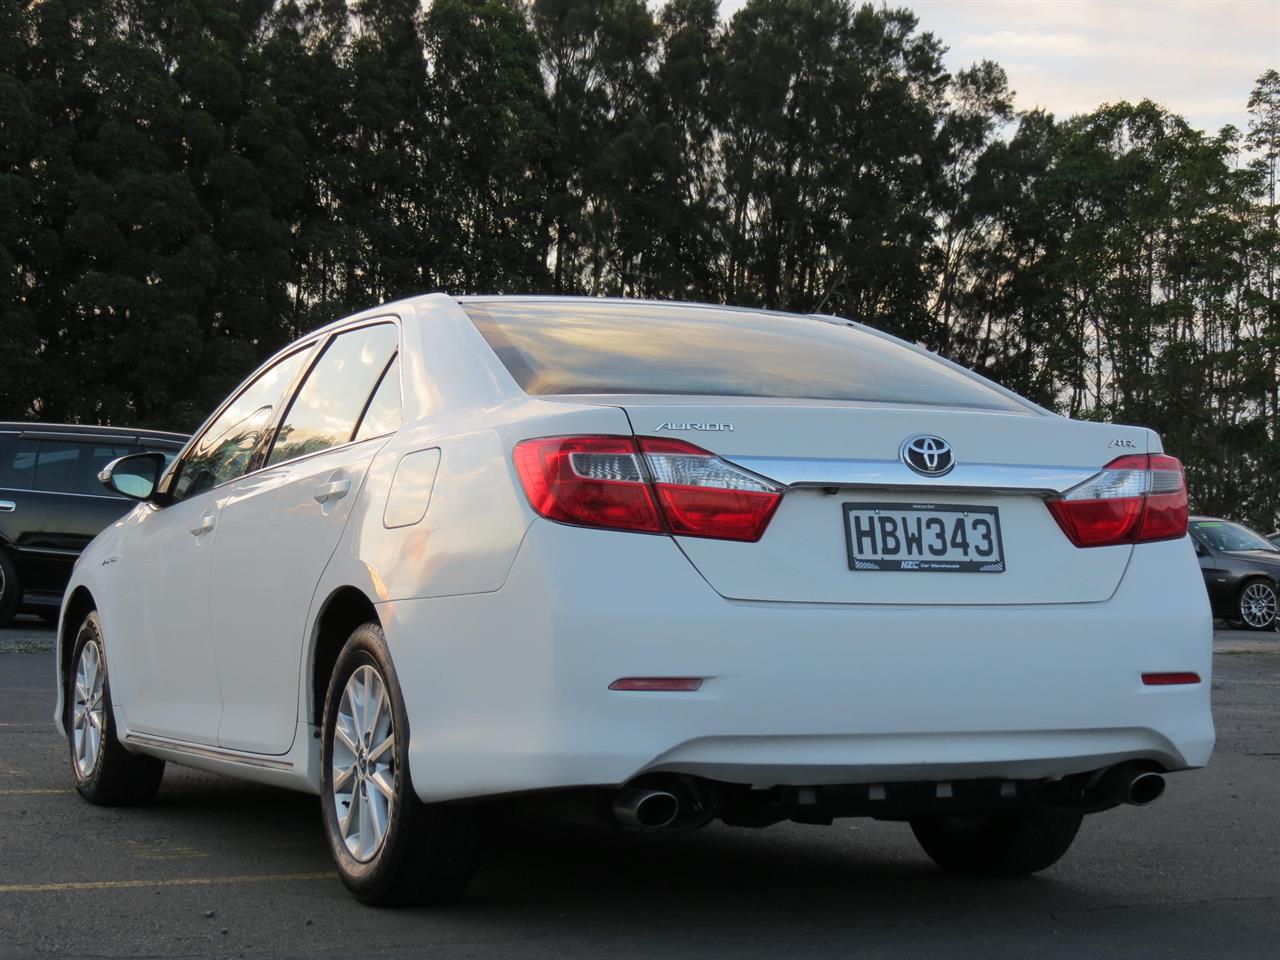 2013 Toyota Aurion only $29 weekly